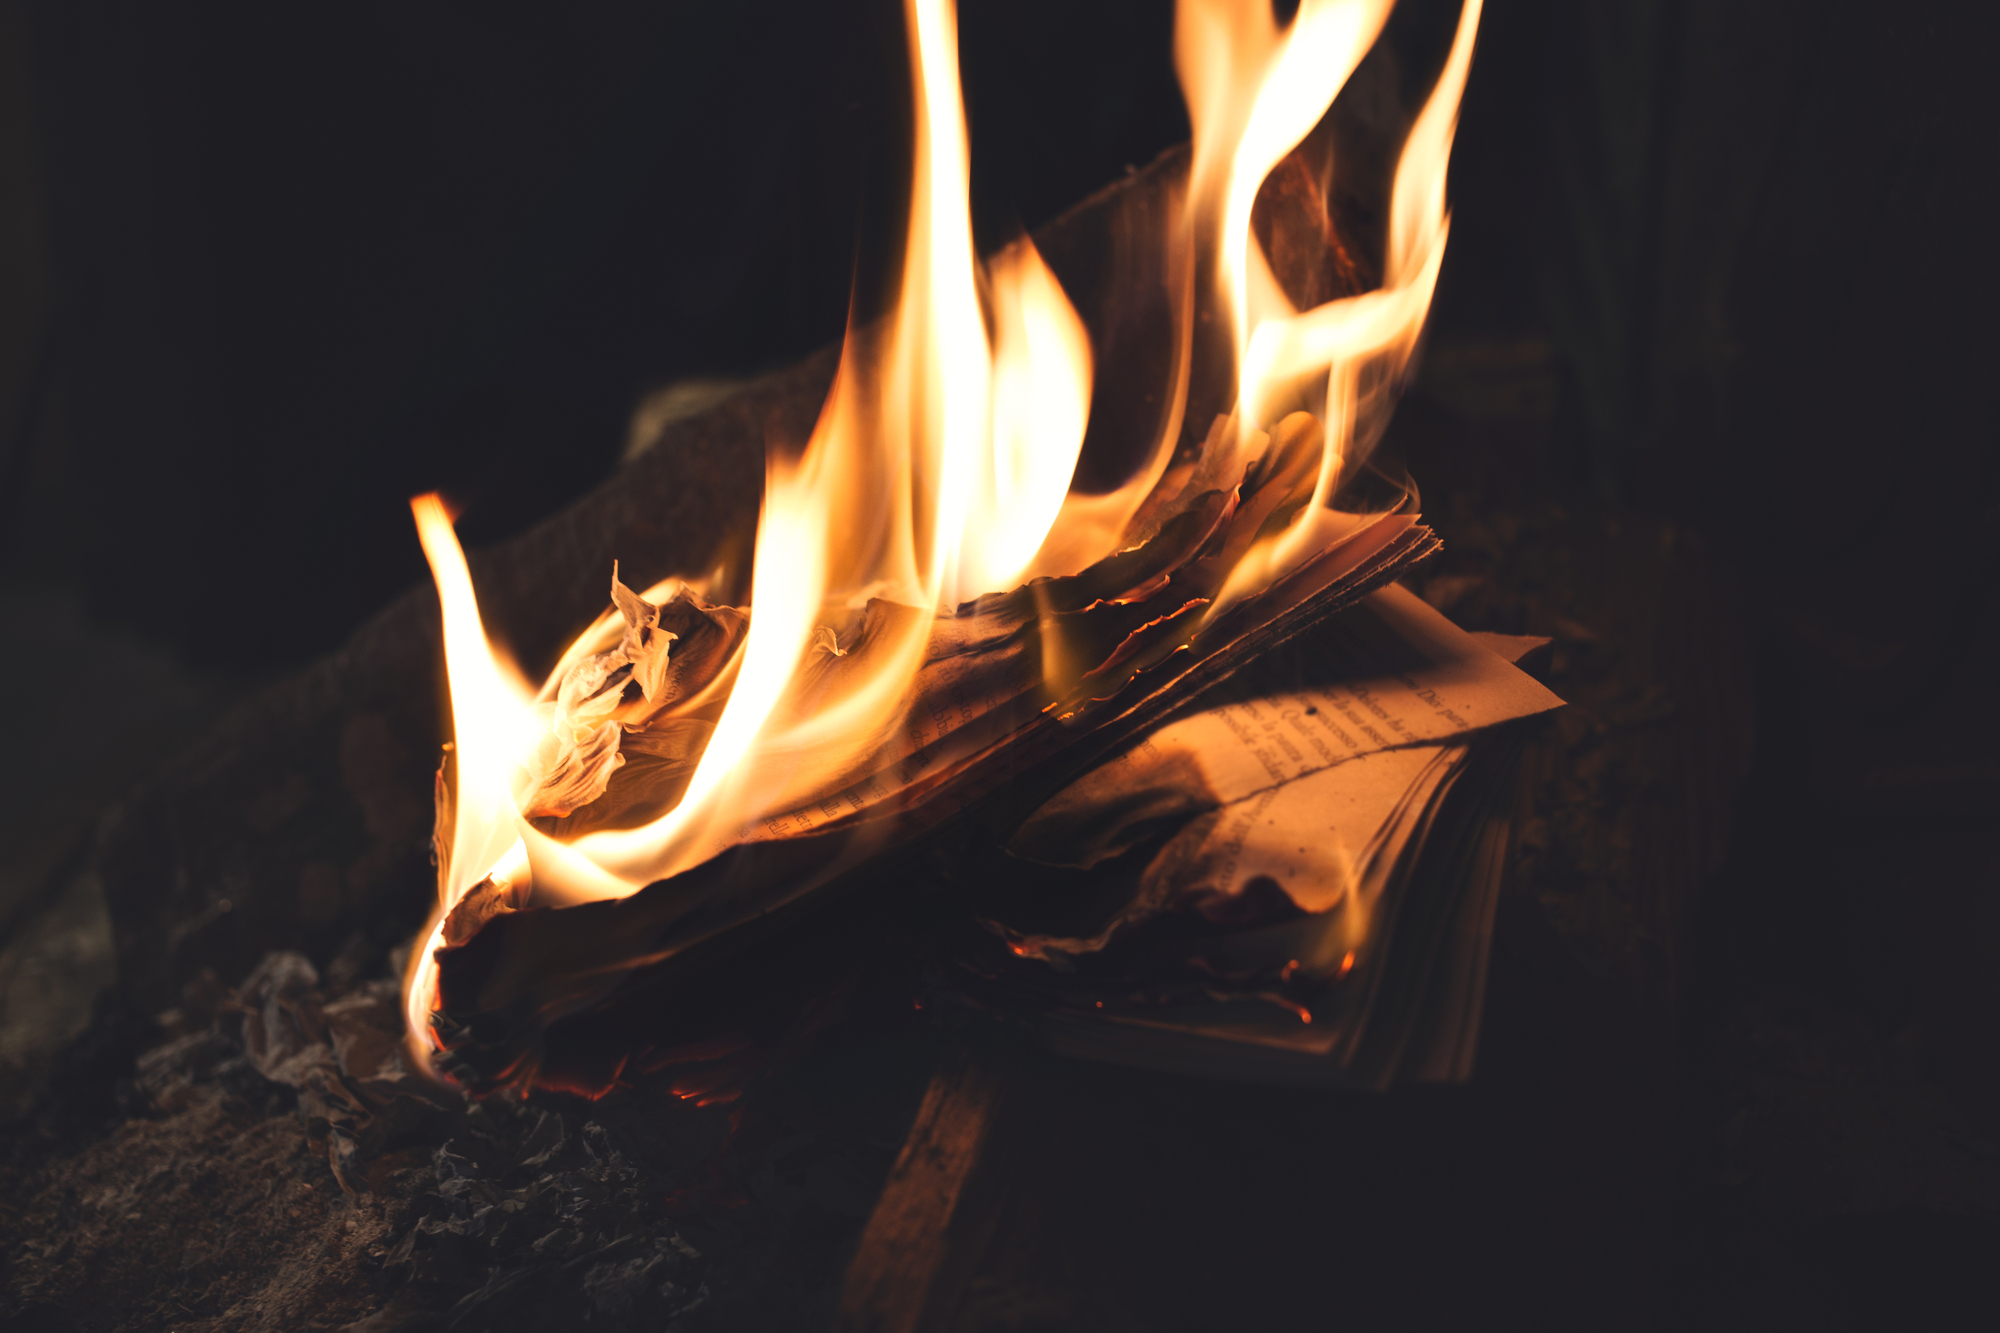 photograph of book burning in flames